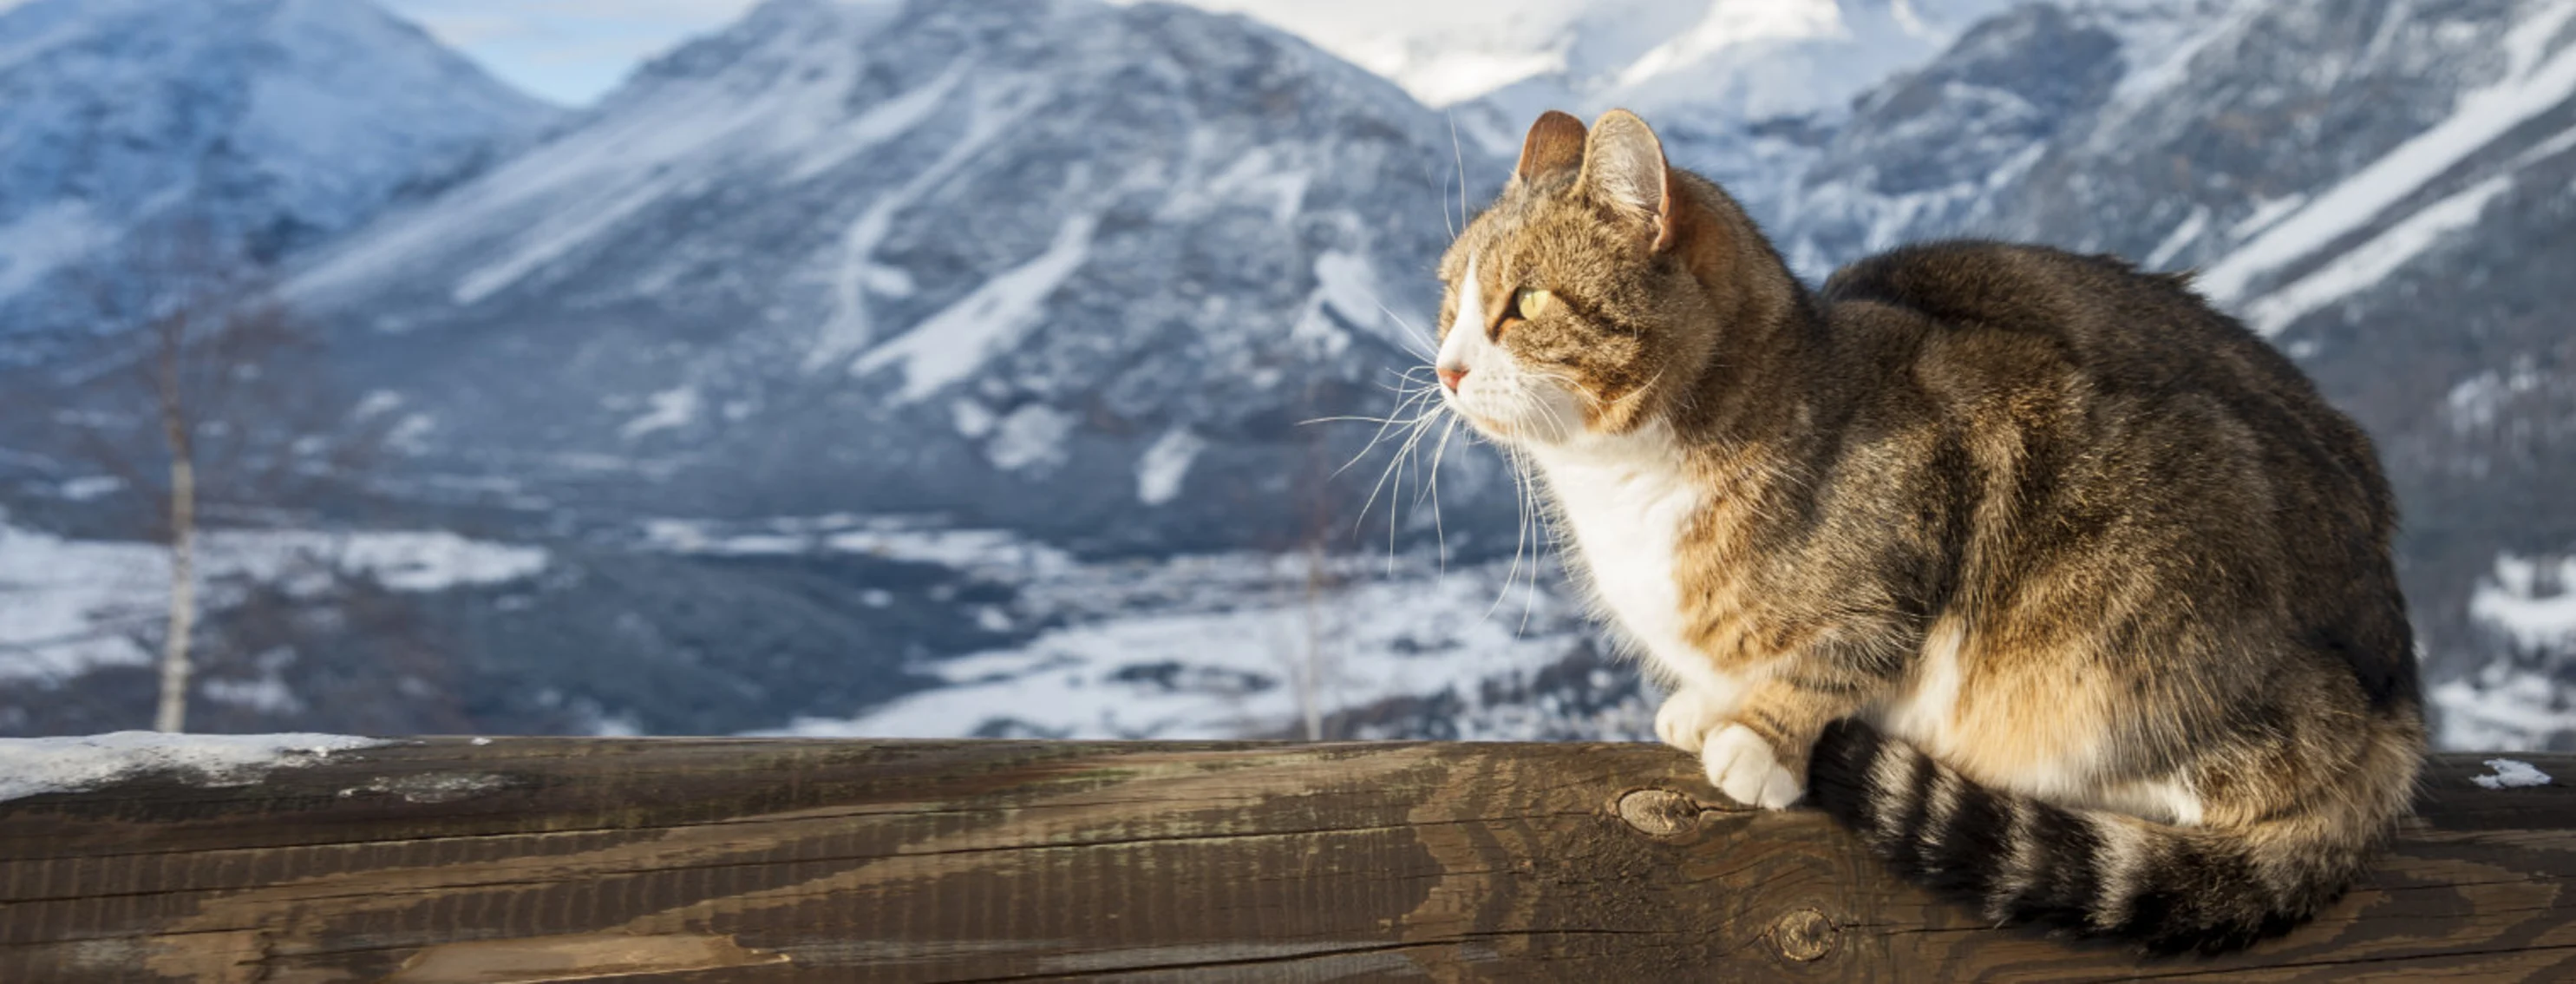 A cat looking to the left with snowy mountains in the background